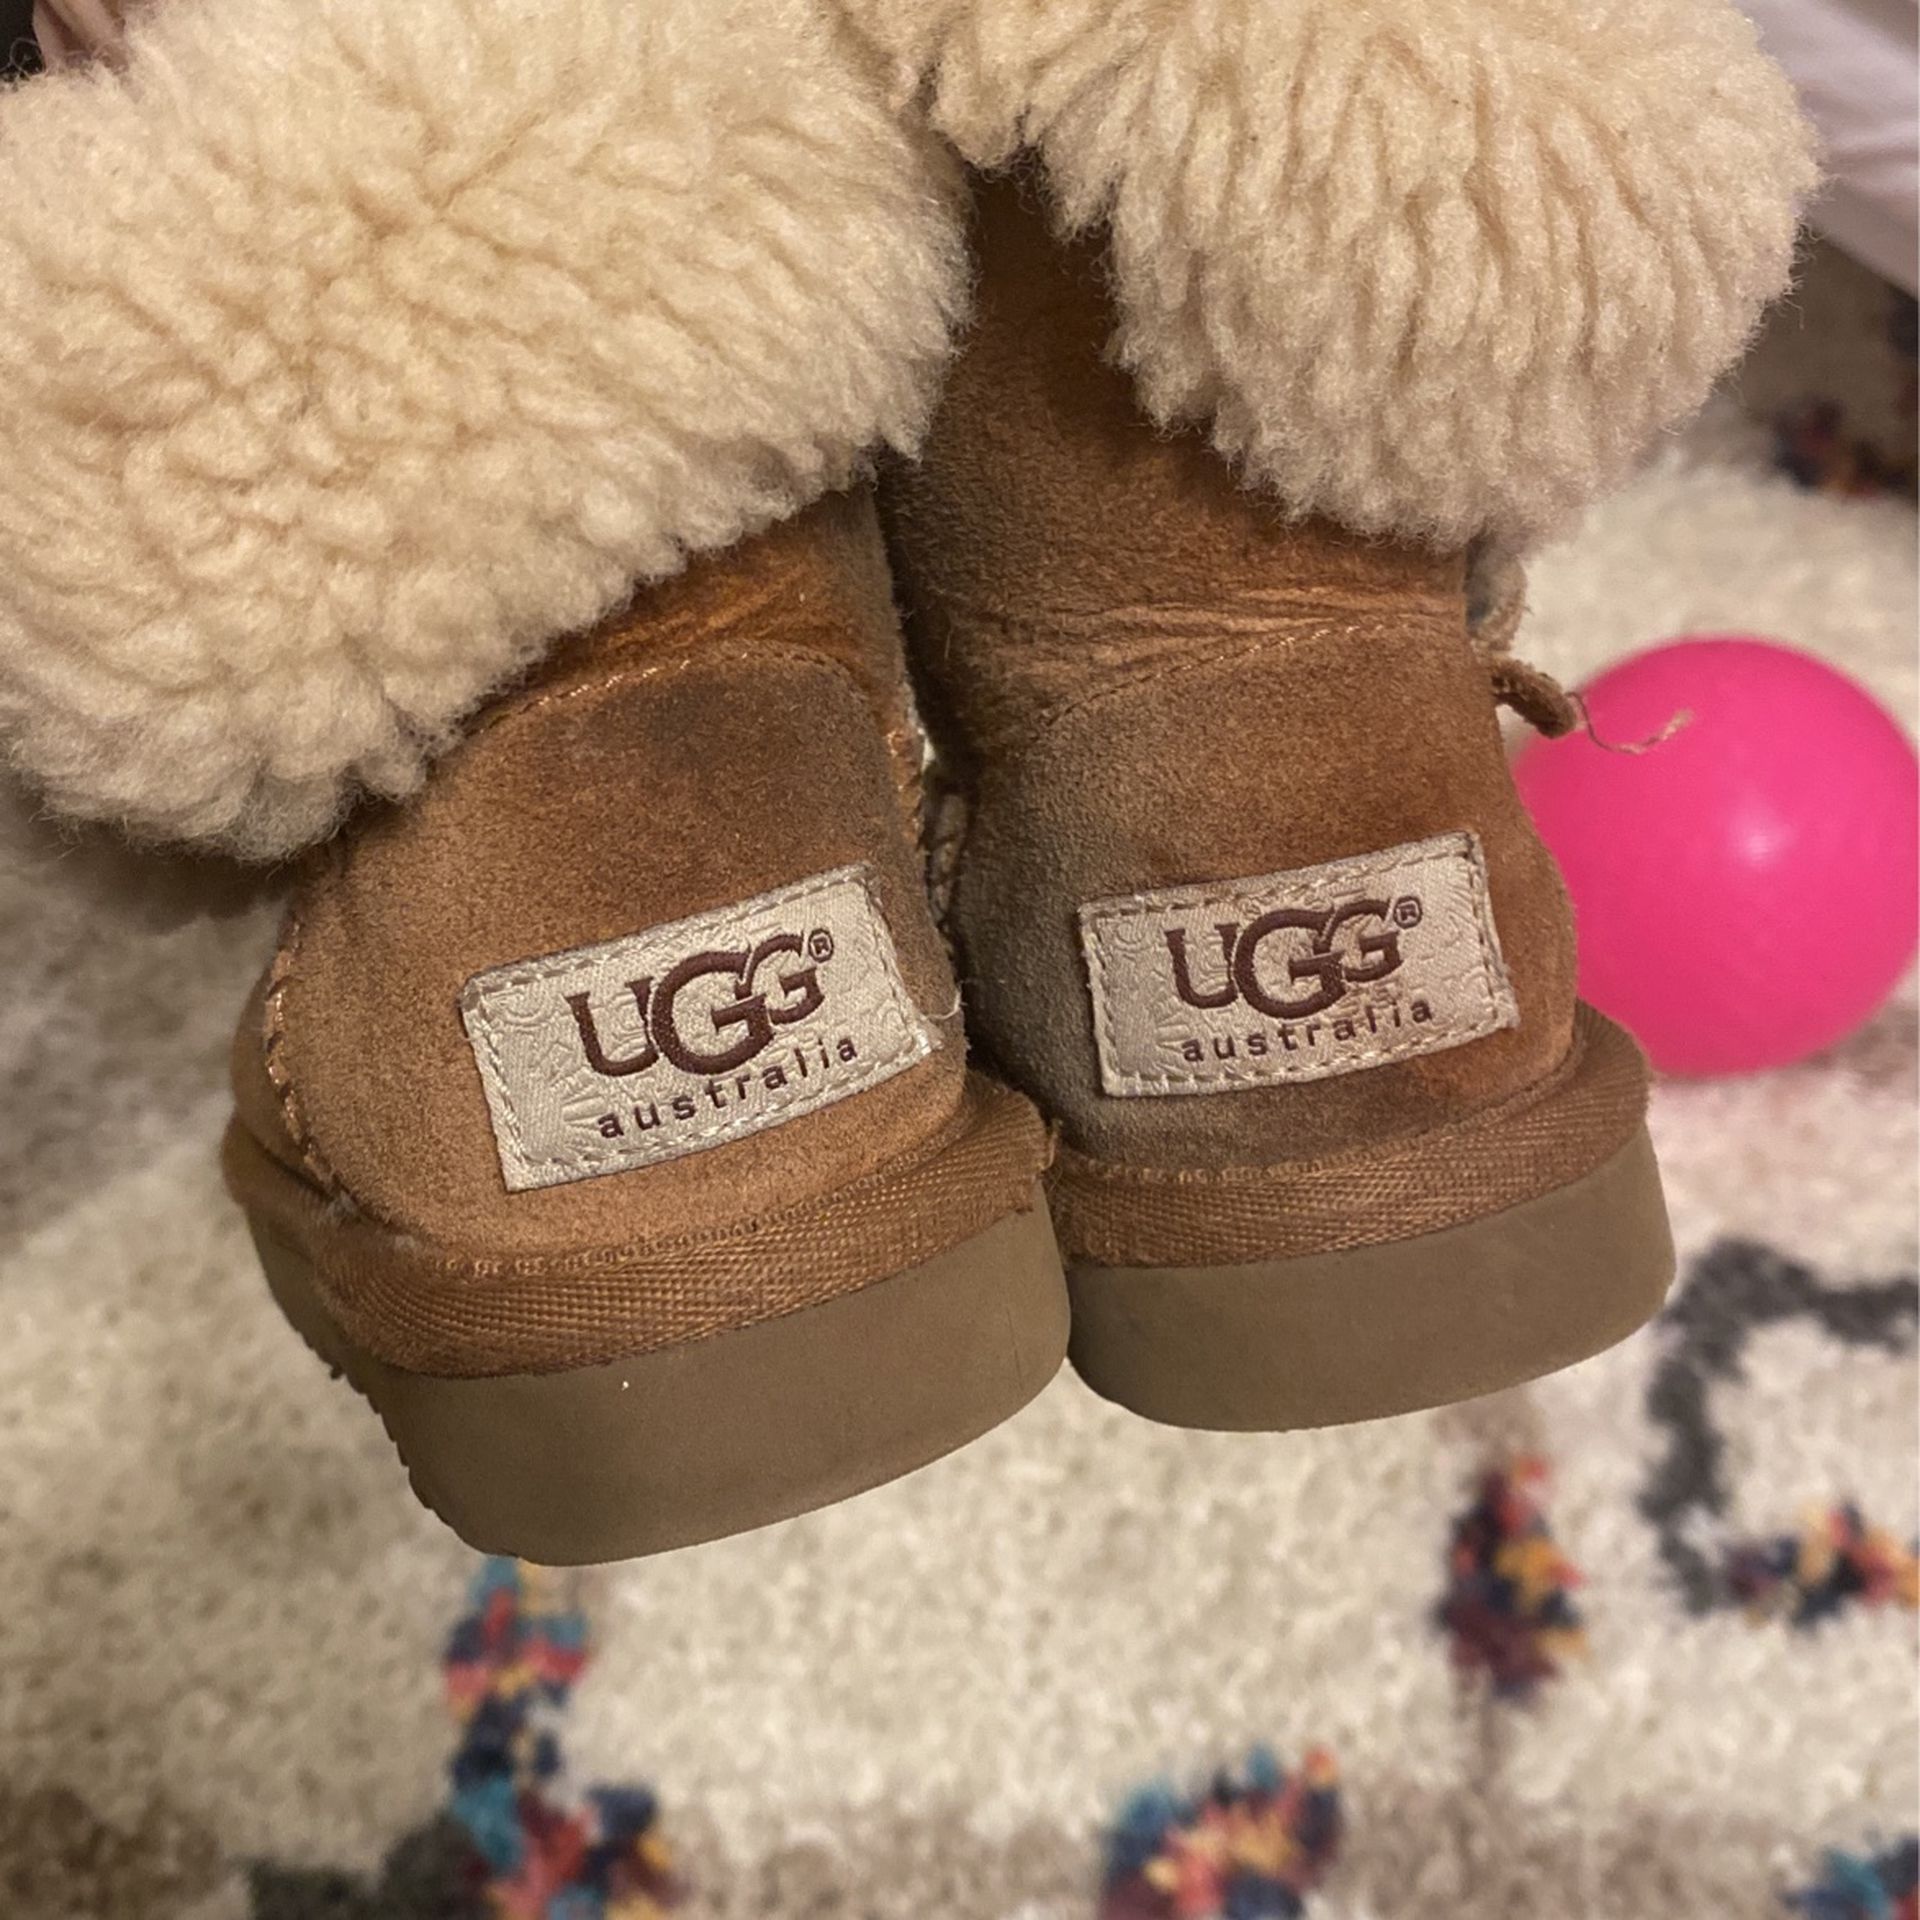 Toddler Size 7 Ugg Boots